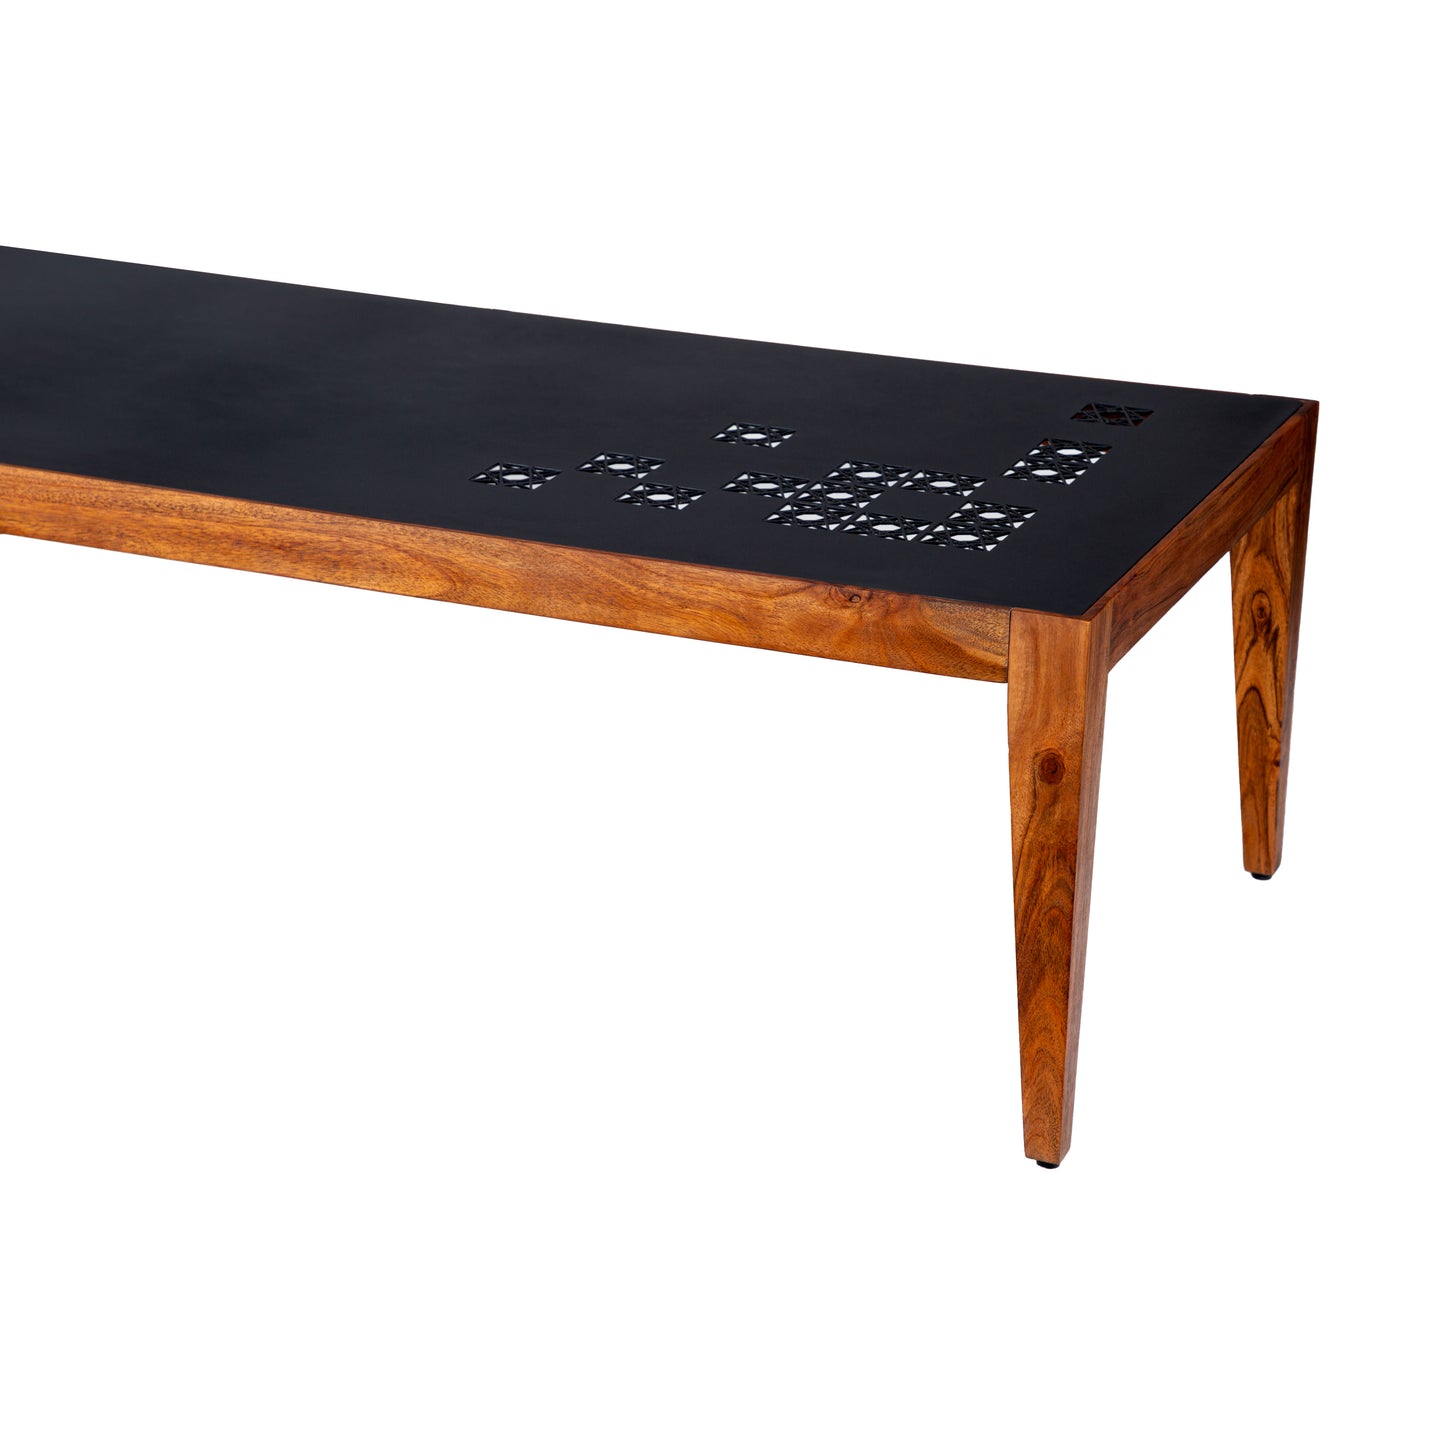 Metal Top Coffee Table with Laser Cut Design, Black and Brown - Alba 47 Inch Rectangular